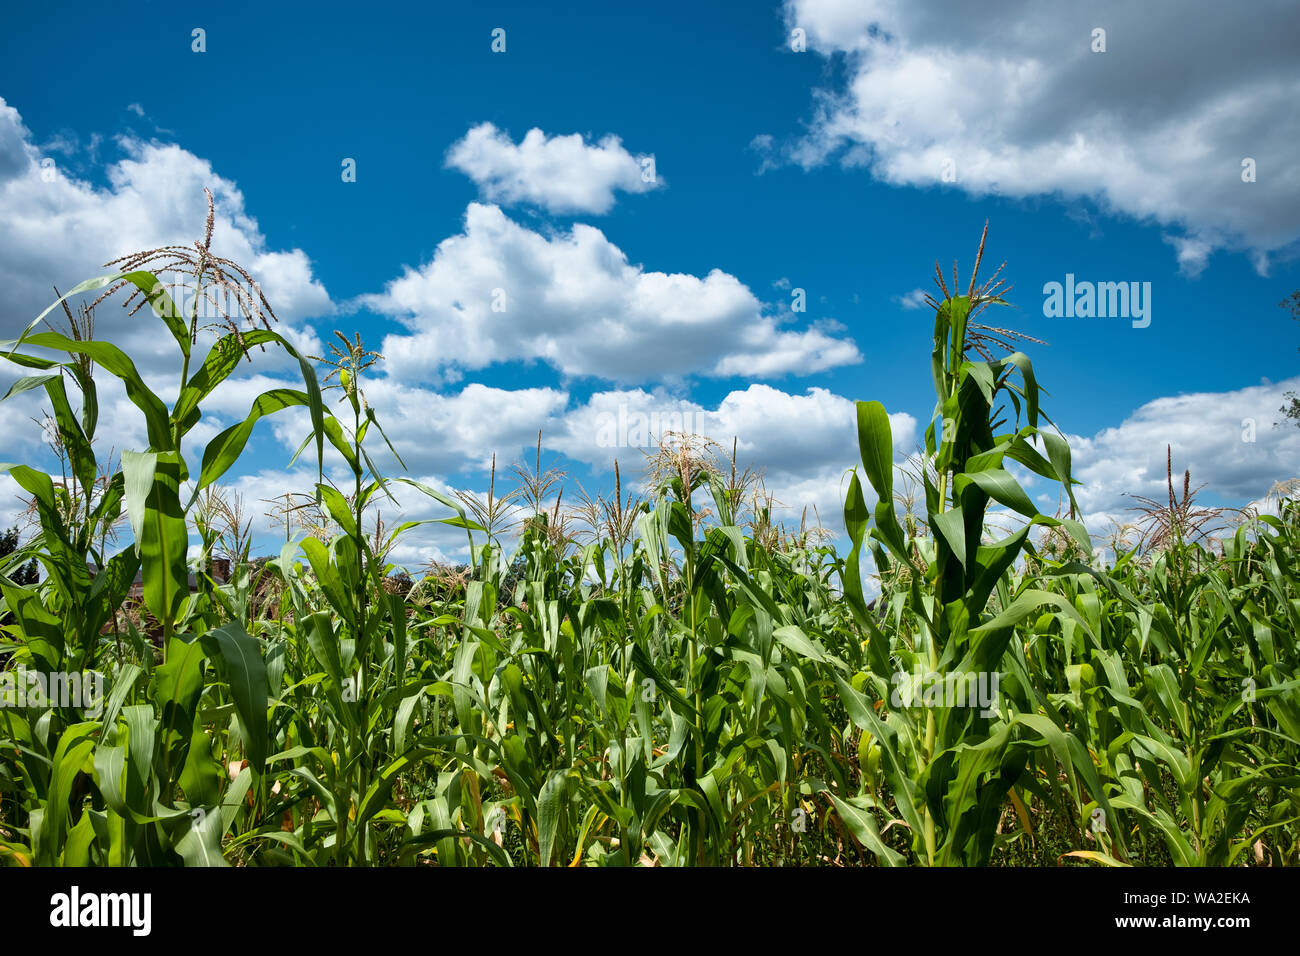 Corn stalks in a corn field on a beautiful summer day with a blue sky and white clouds. Stock Photo